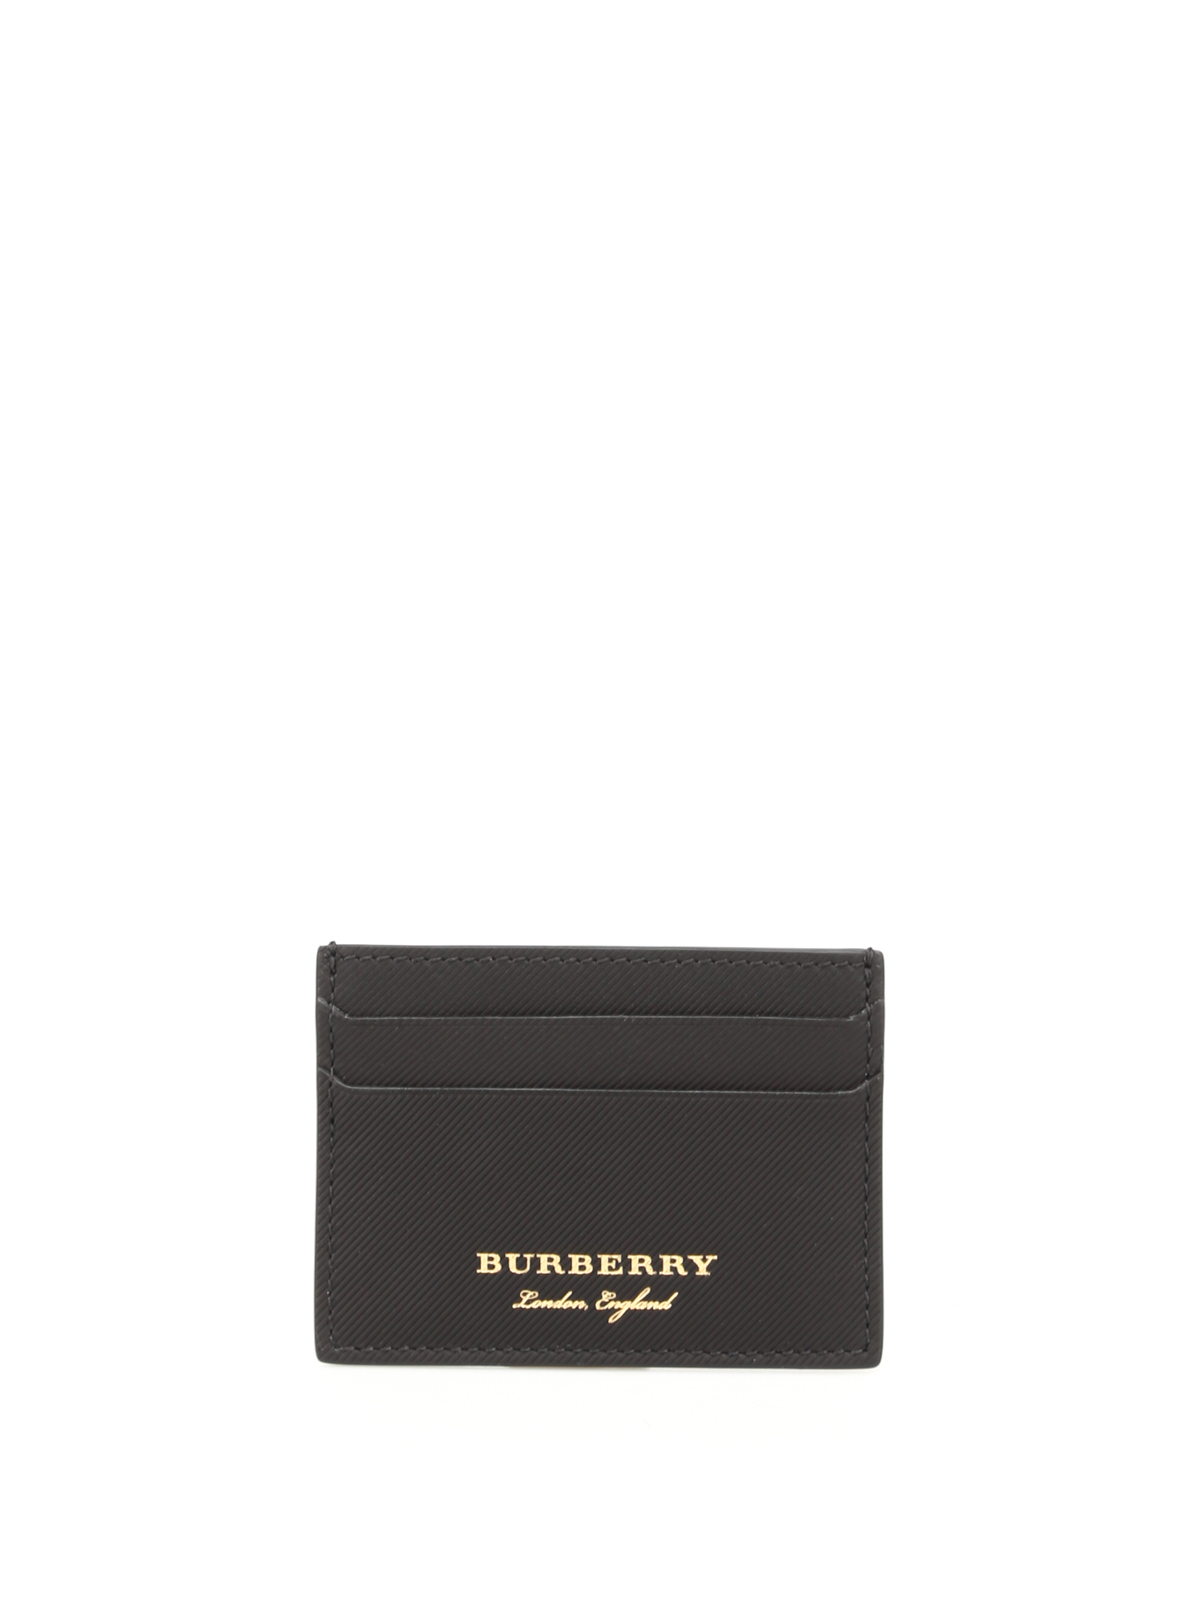 burberry trench leather wallet